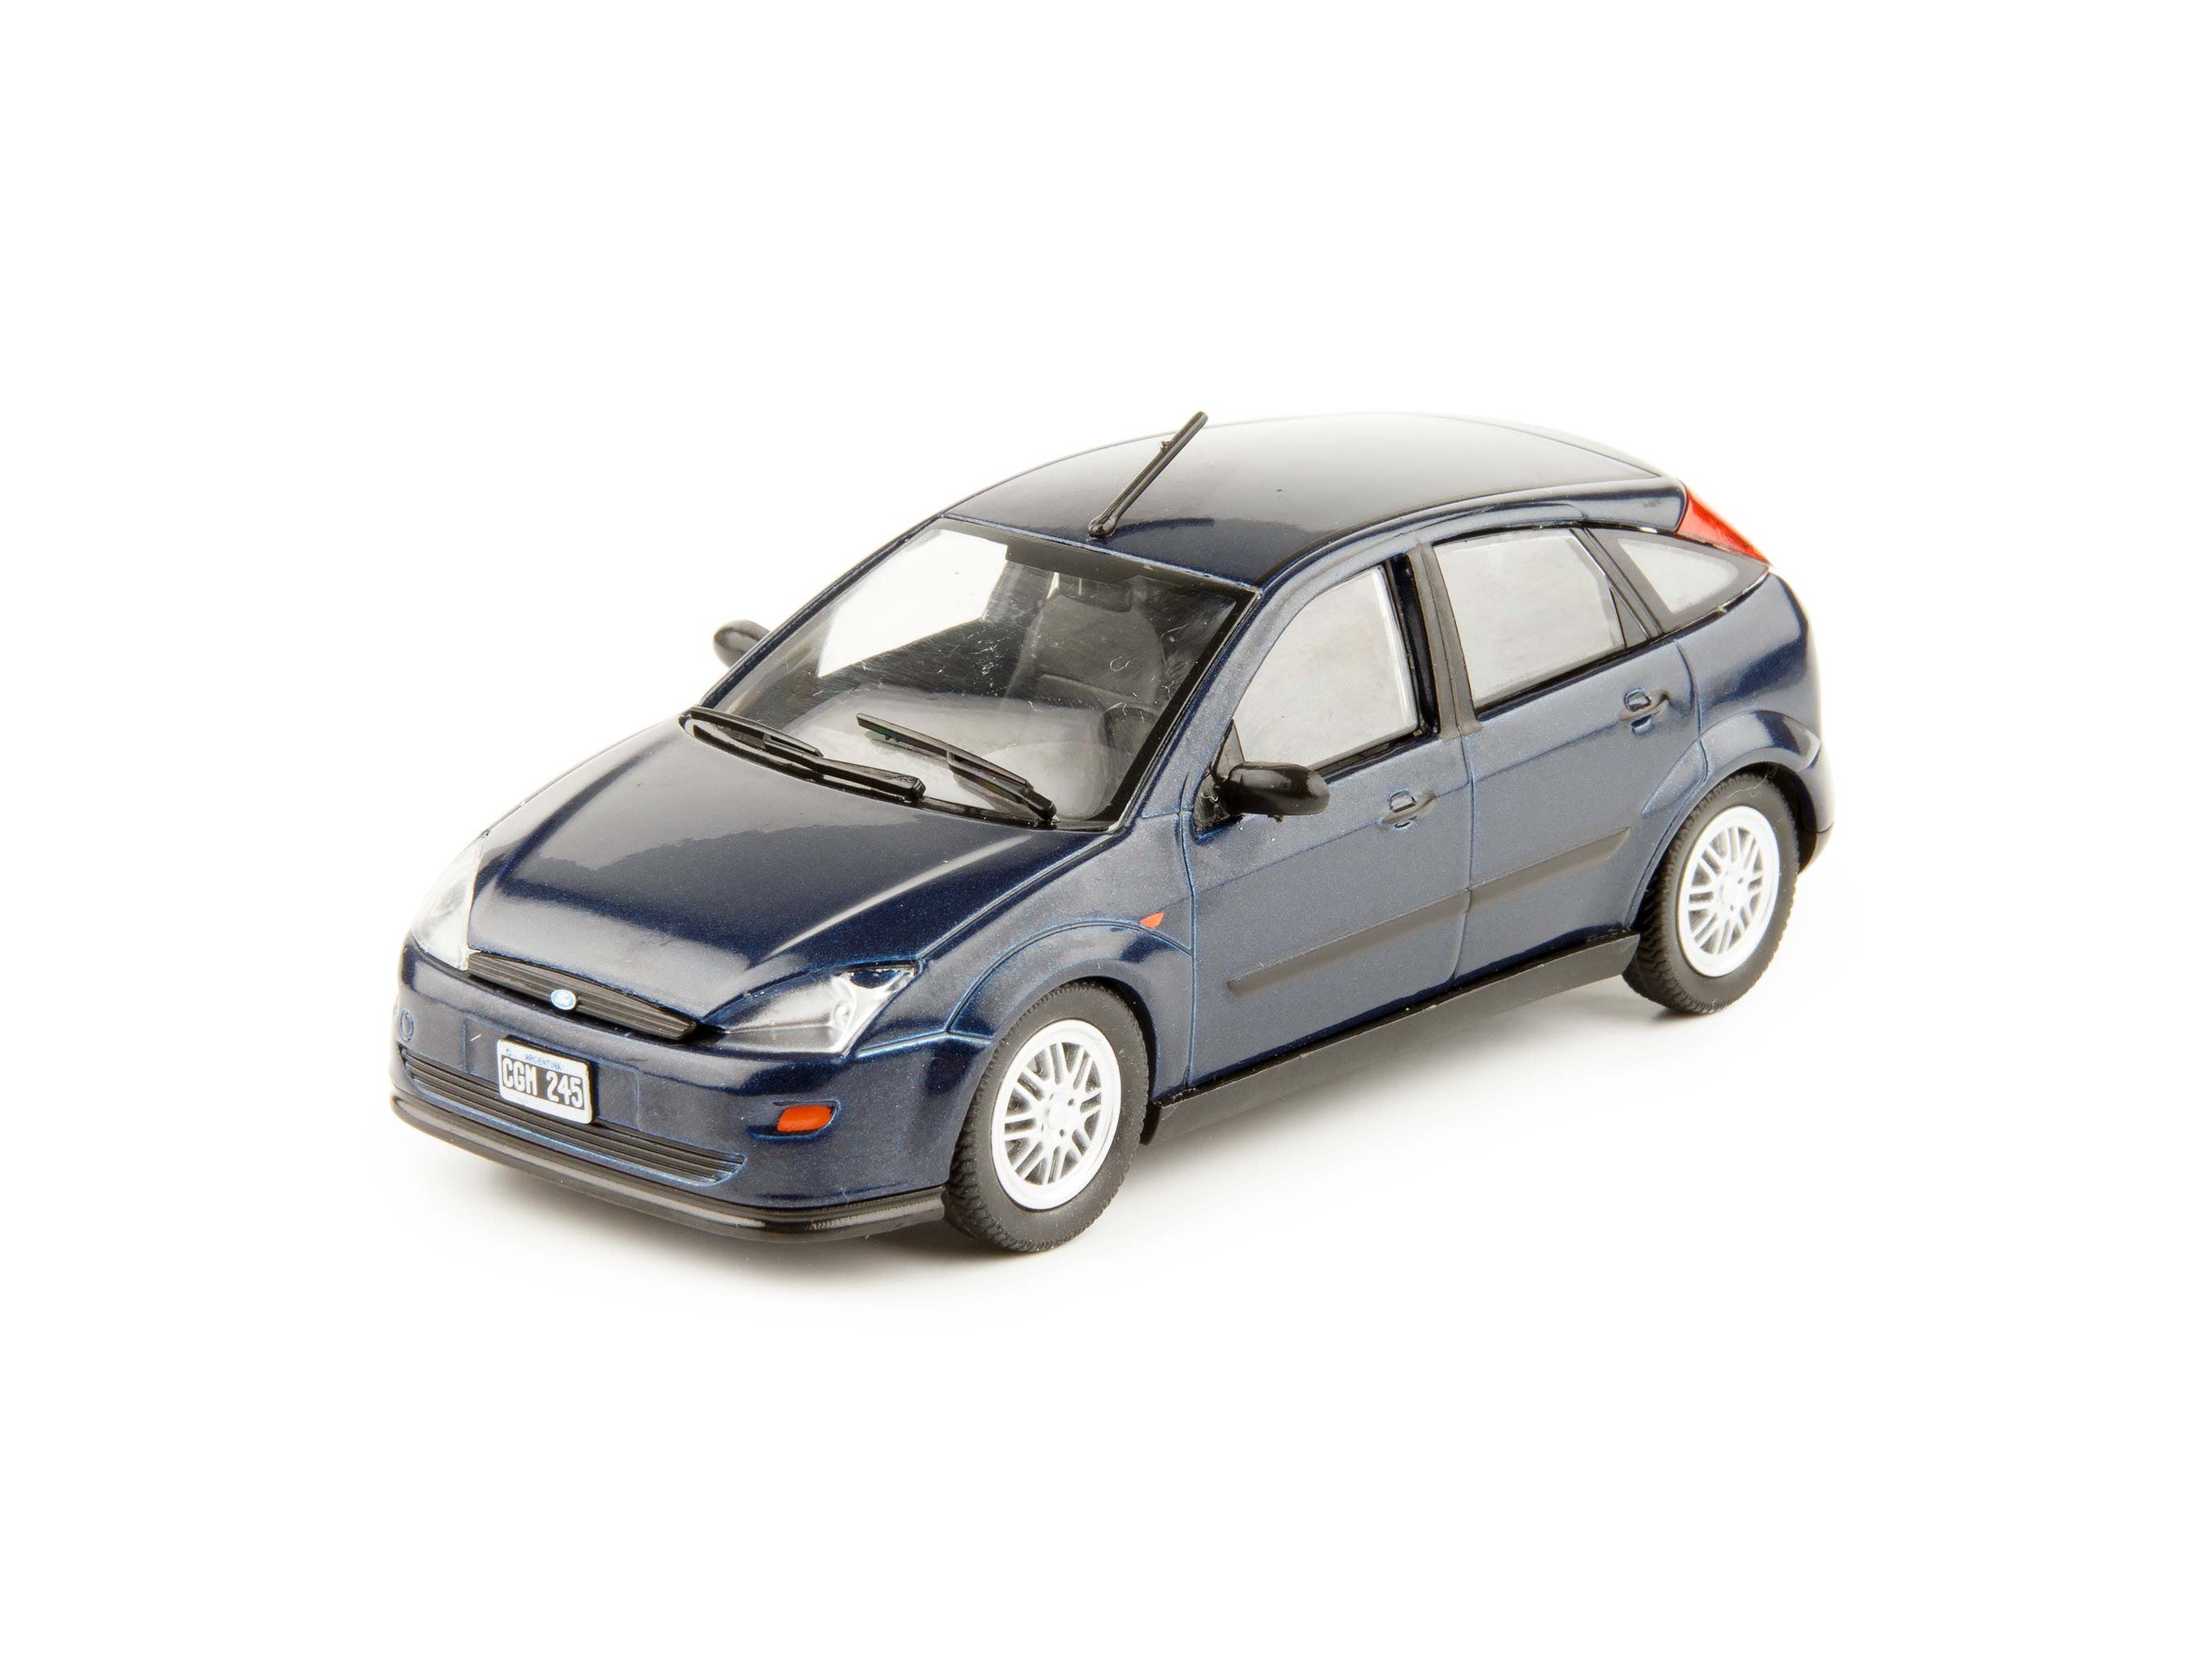 Ford Focus 1998 blue- 1:43 Scale Diecast Model Car-Unbranded-Diecast Model Centre